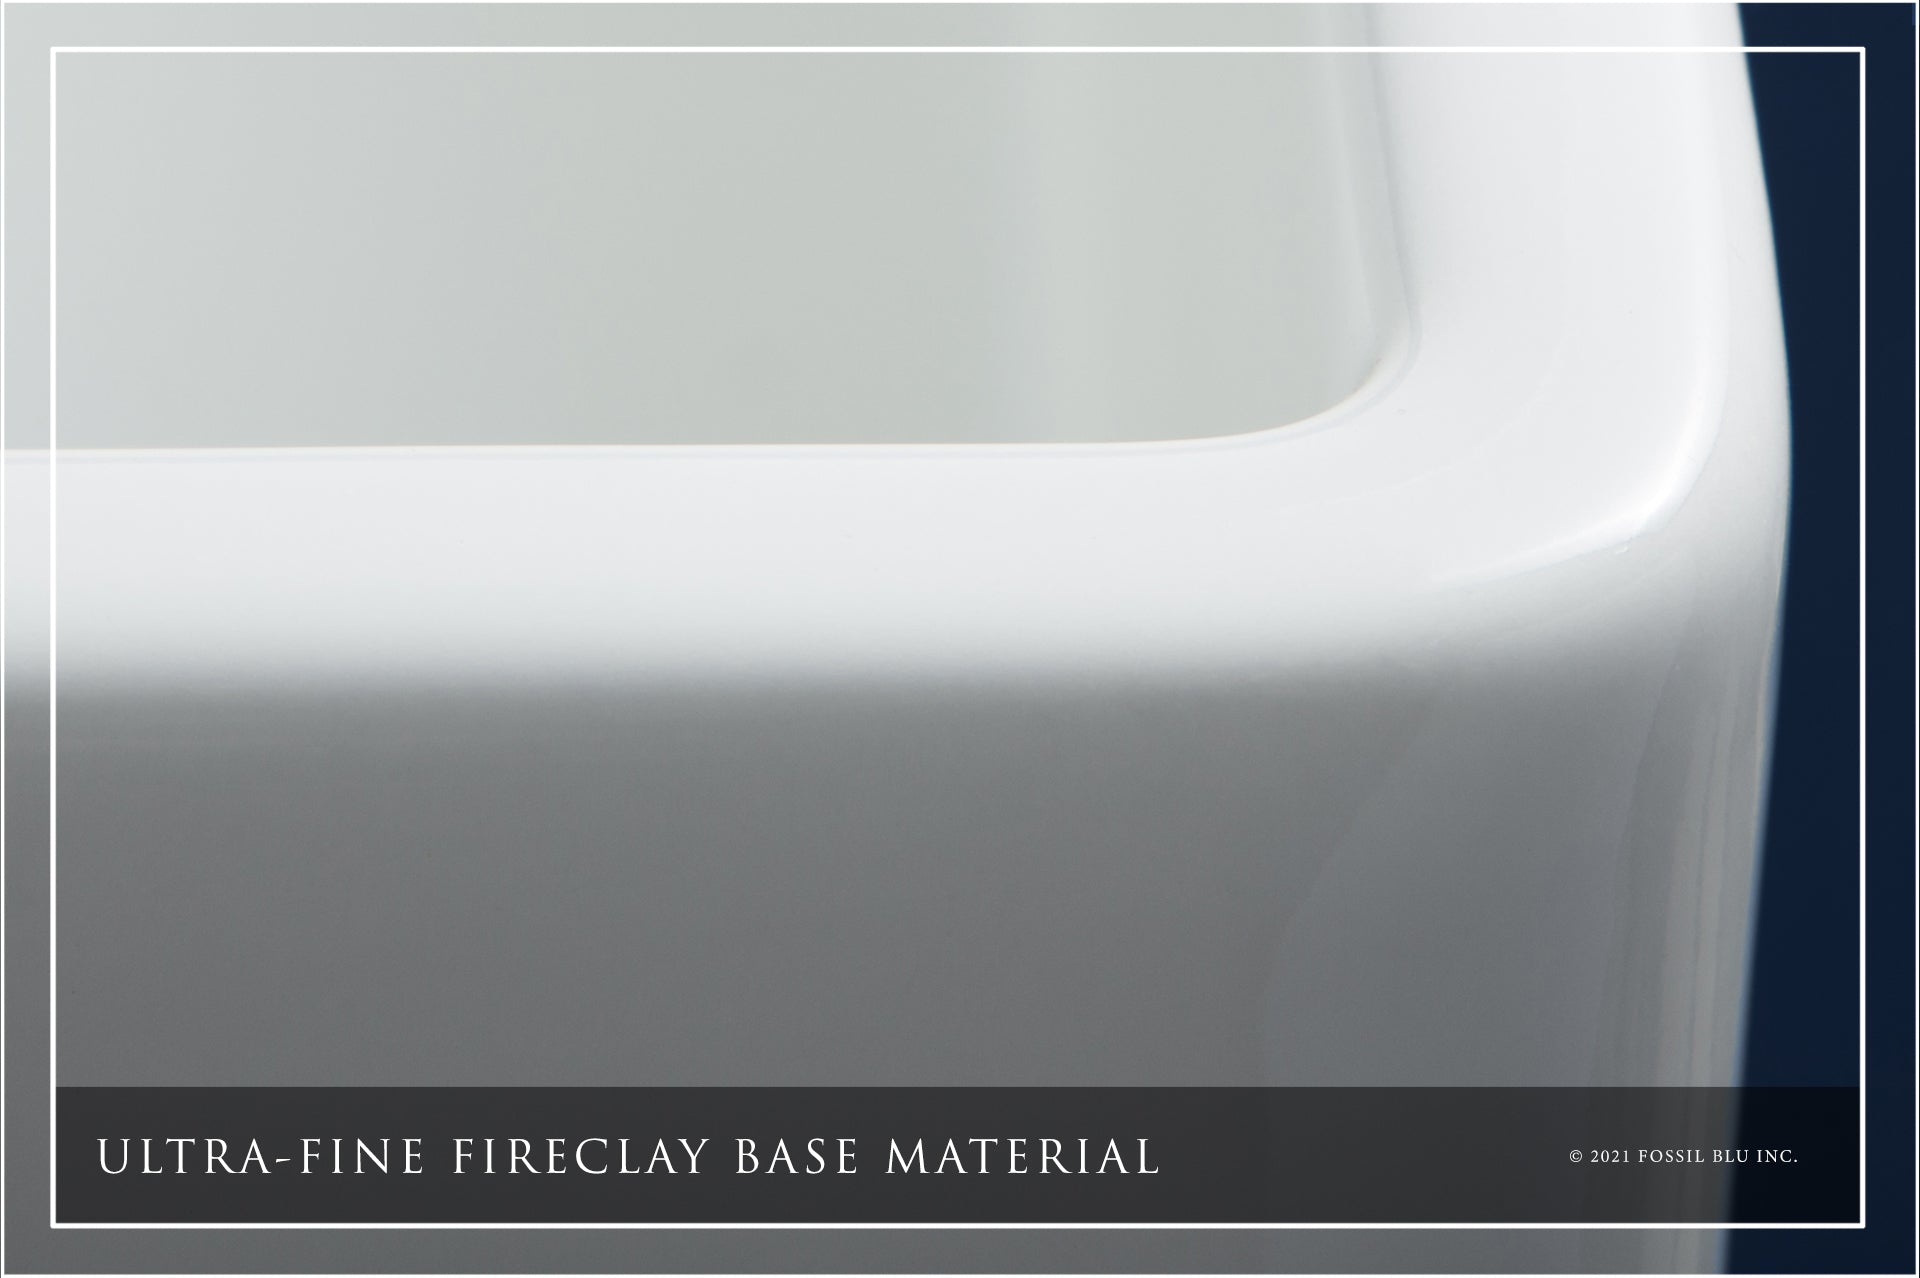 FSW1010PN LUXURY 26-INCH SOLID FIRECLAY FARMHOUSE SINK IN WHITE, POLISHED NICKEL ACCS, BELTED FRONT